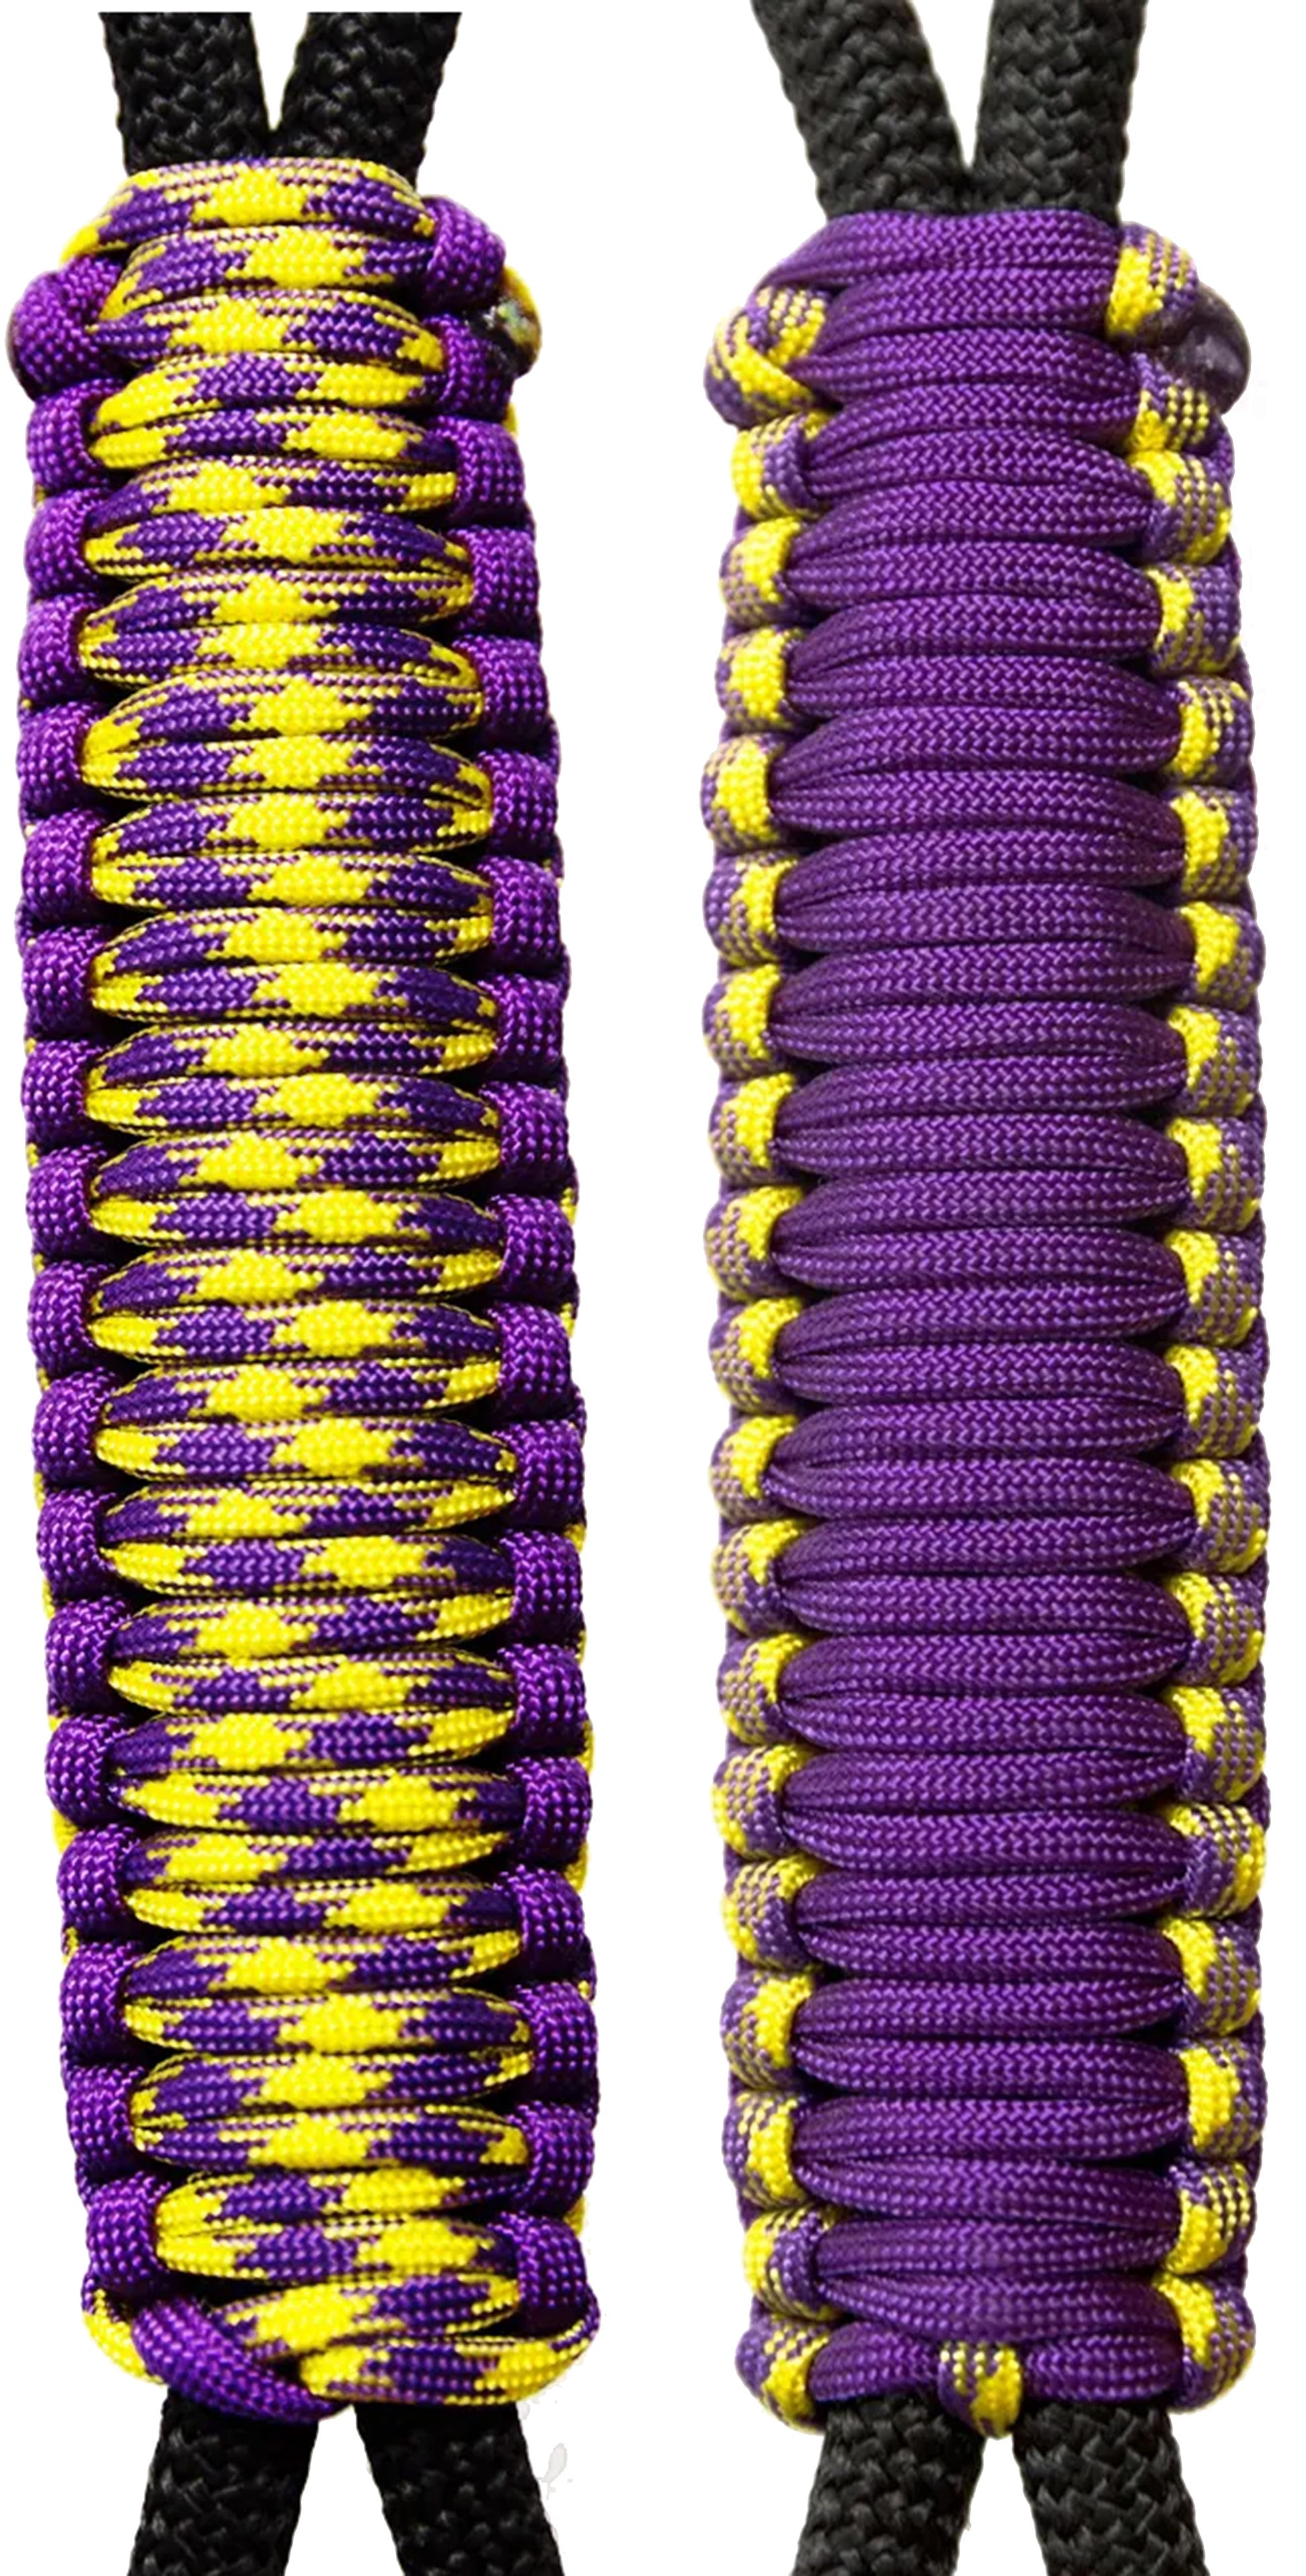 Paracord Handmade Handles for Stainless Steel Tumblers - Made in